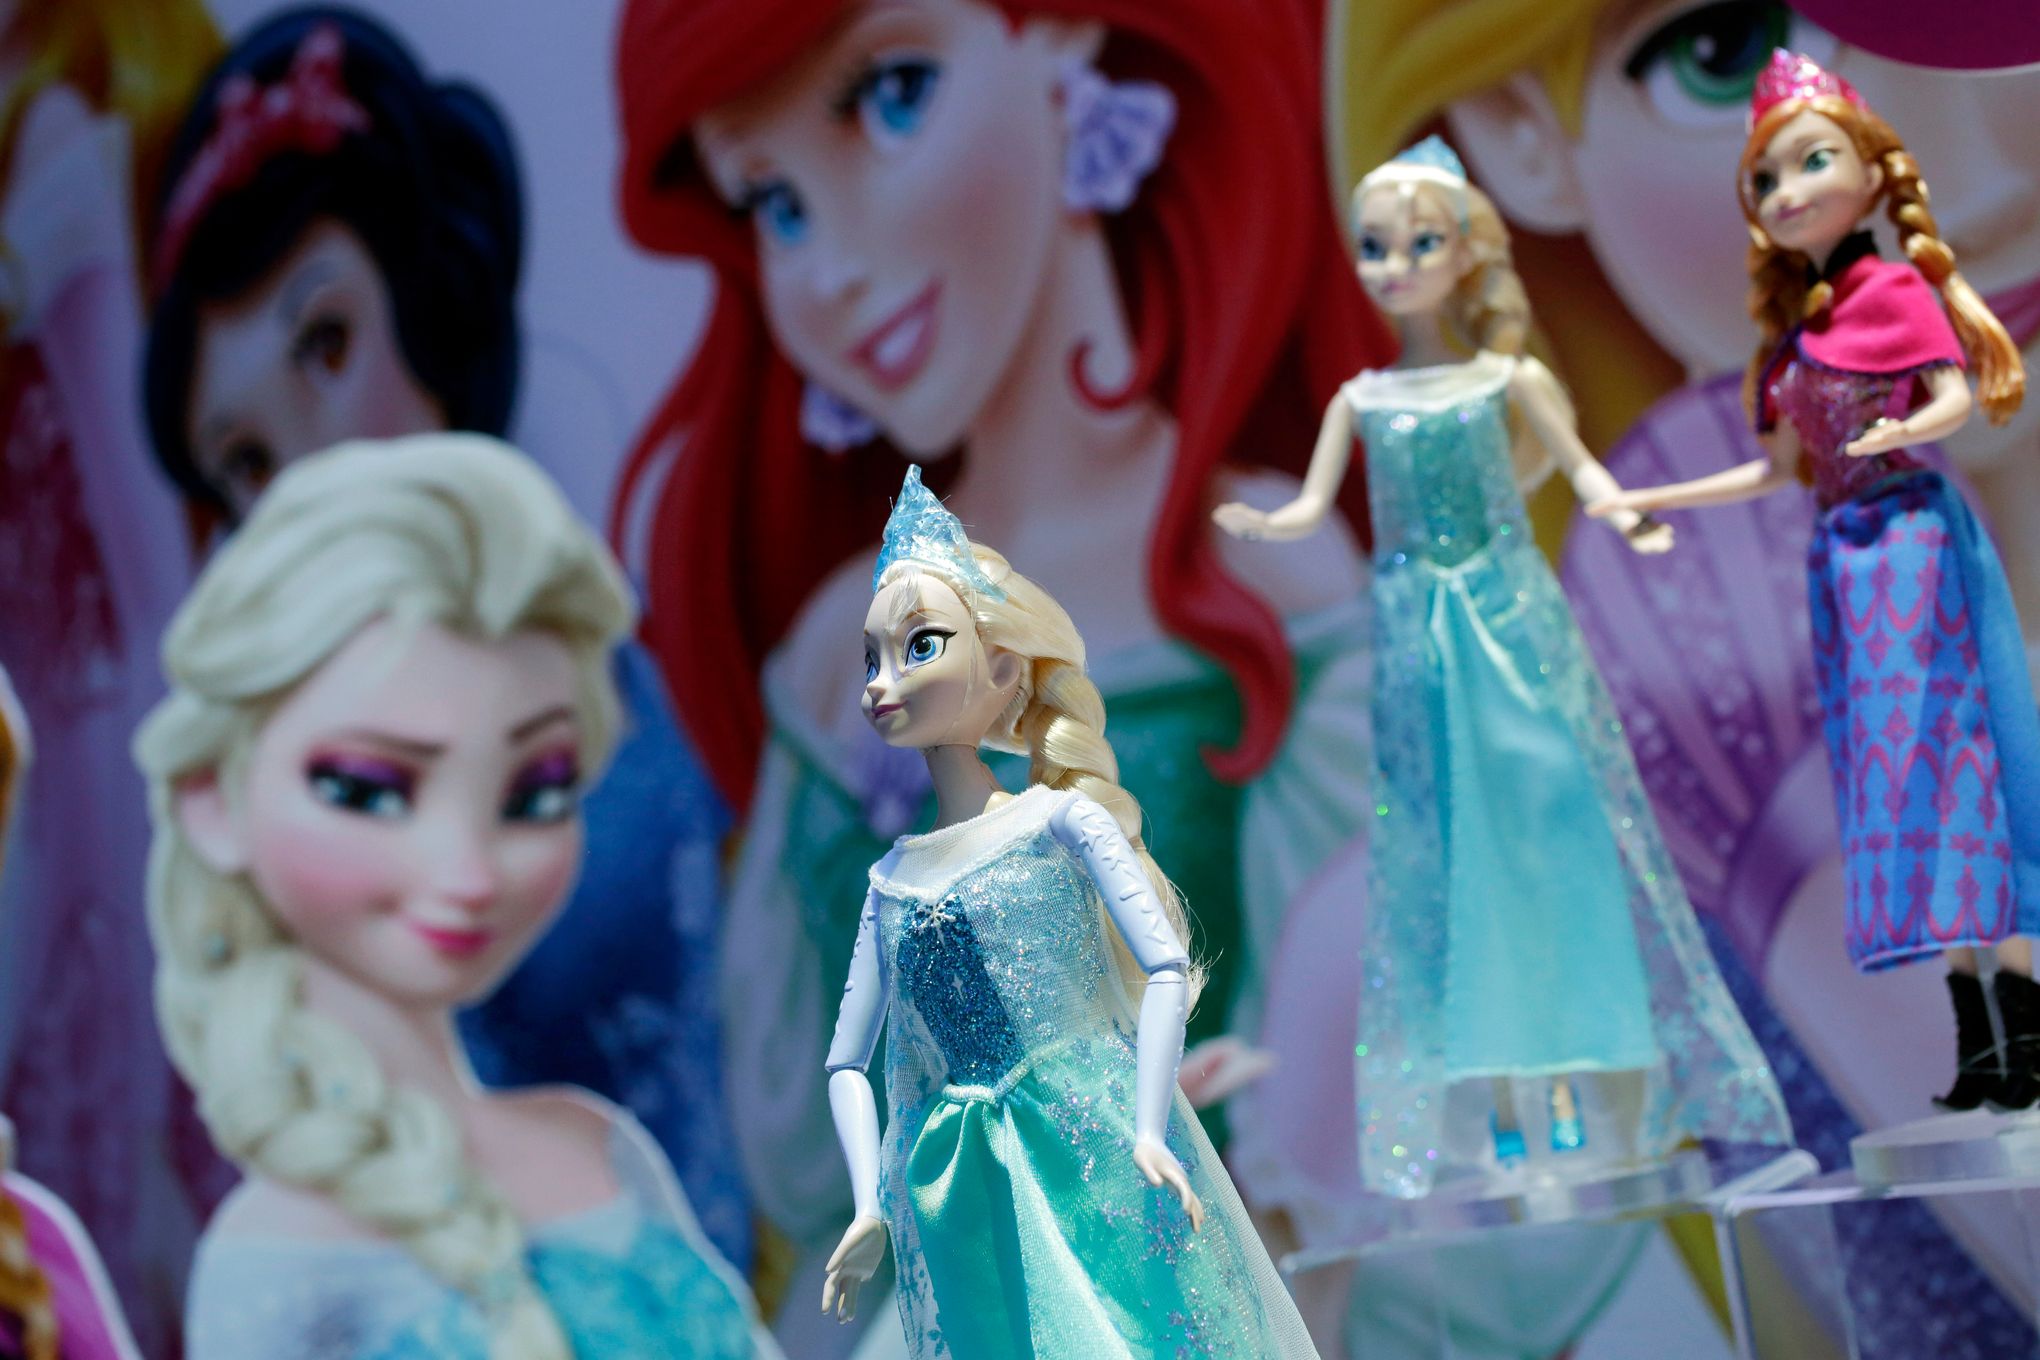 Disney Princess toys and Frozen characters are coming back to Mattel - KTVZ